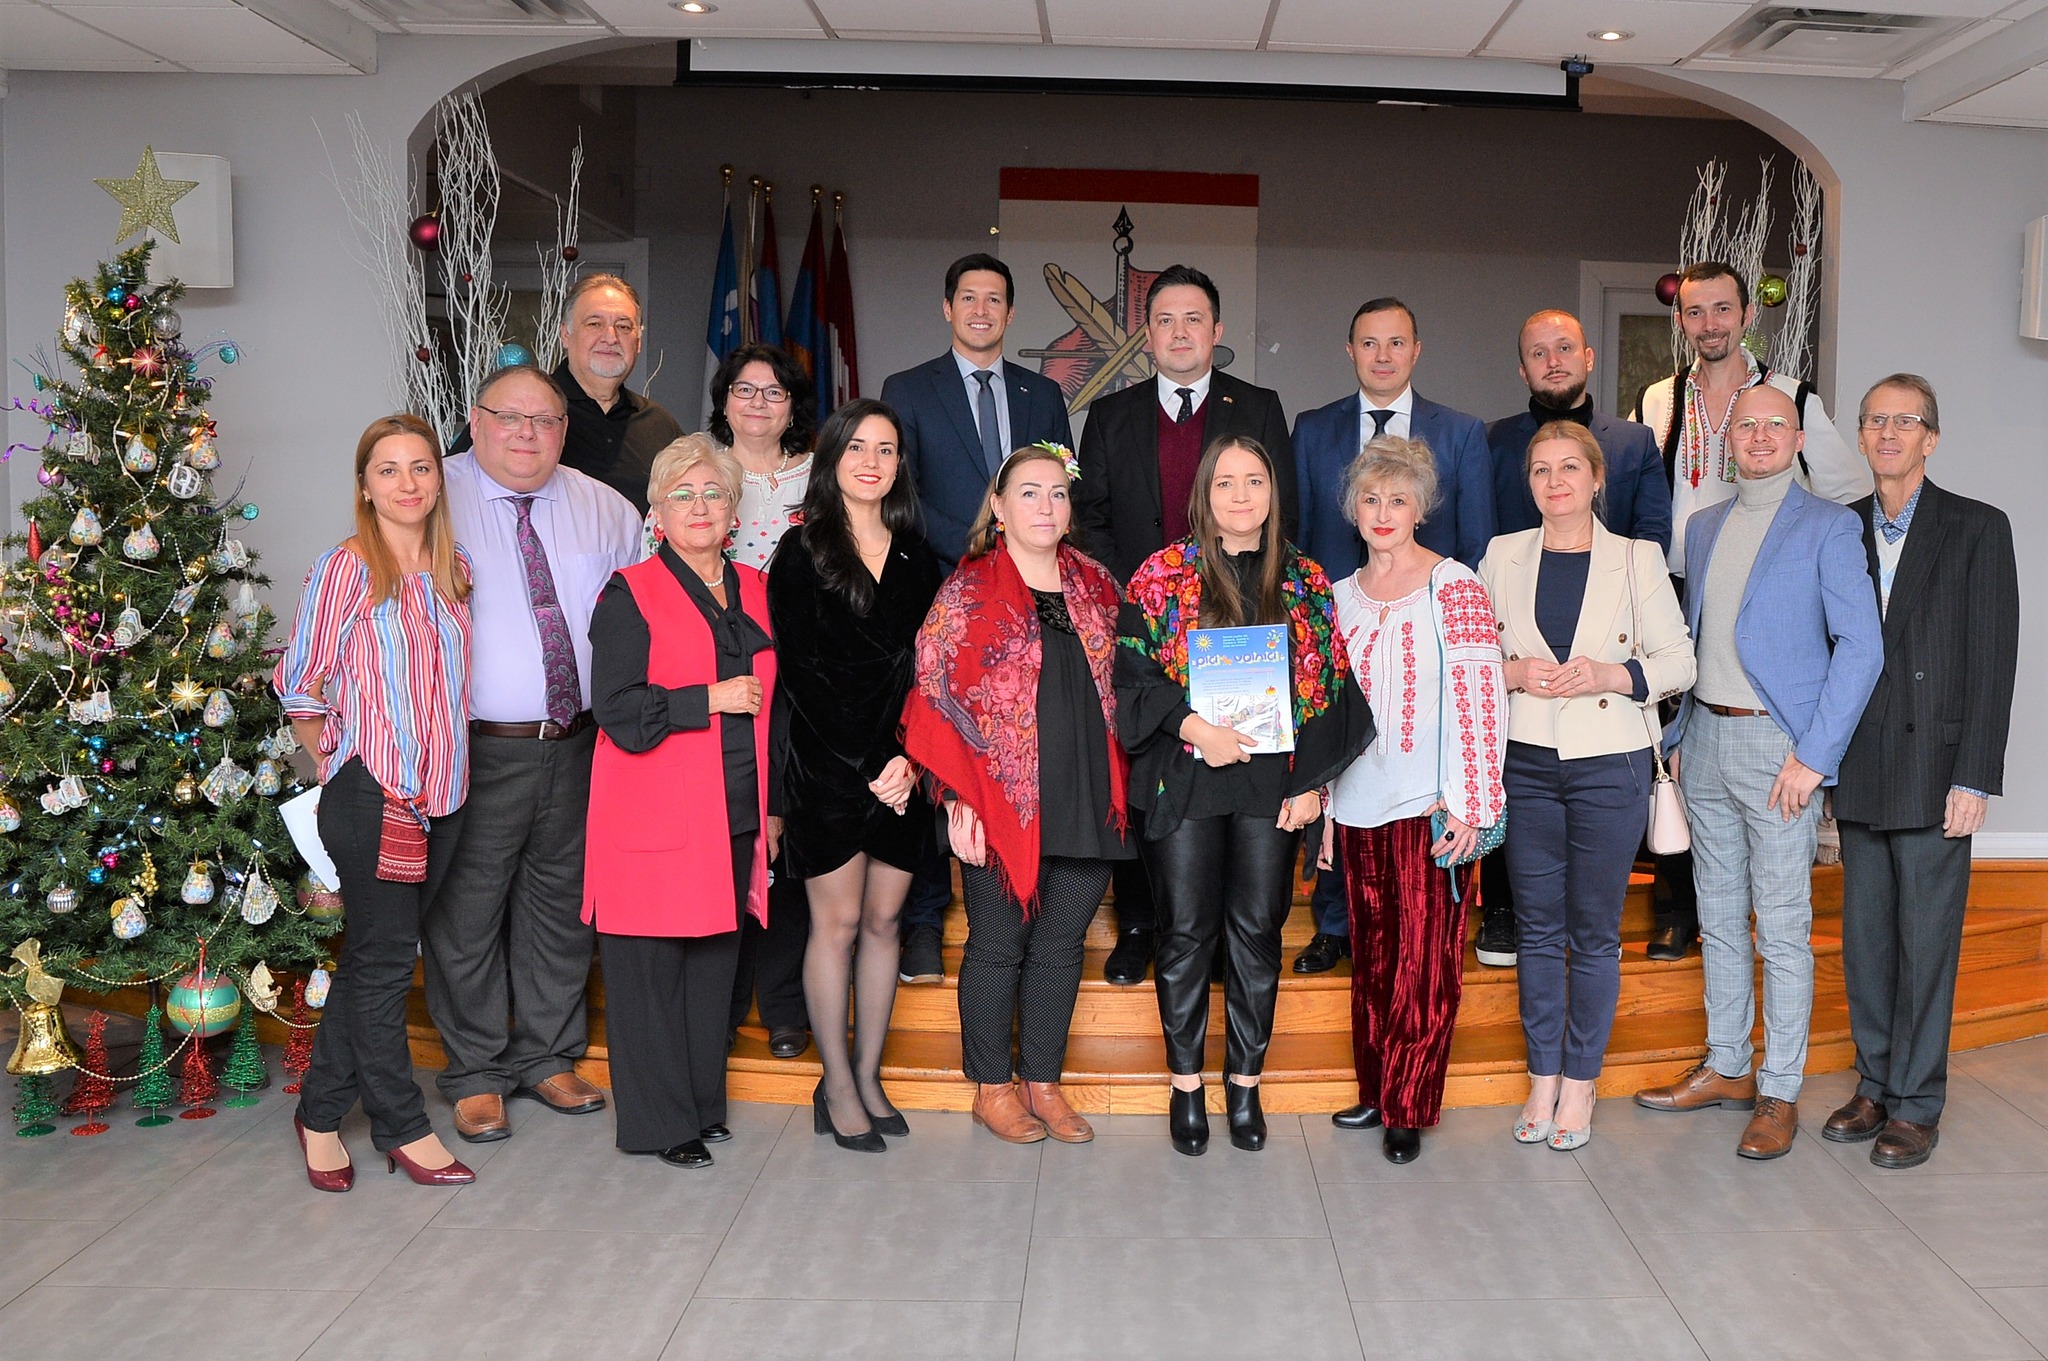 "Christmas in the Community", an event organized by members of the Canadian diaspora